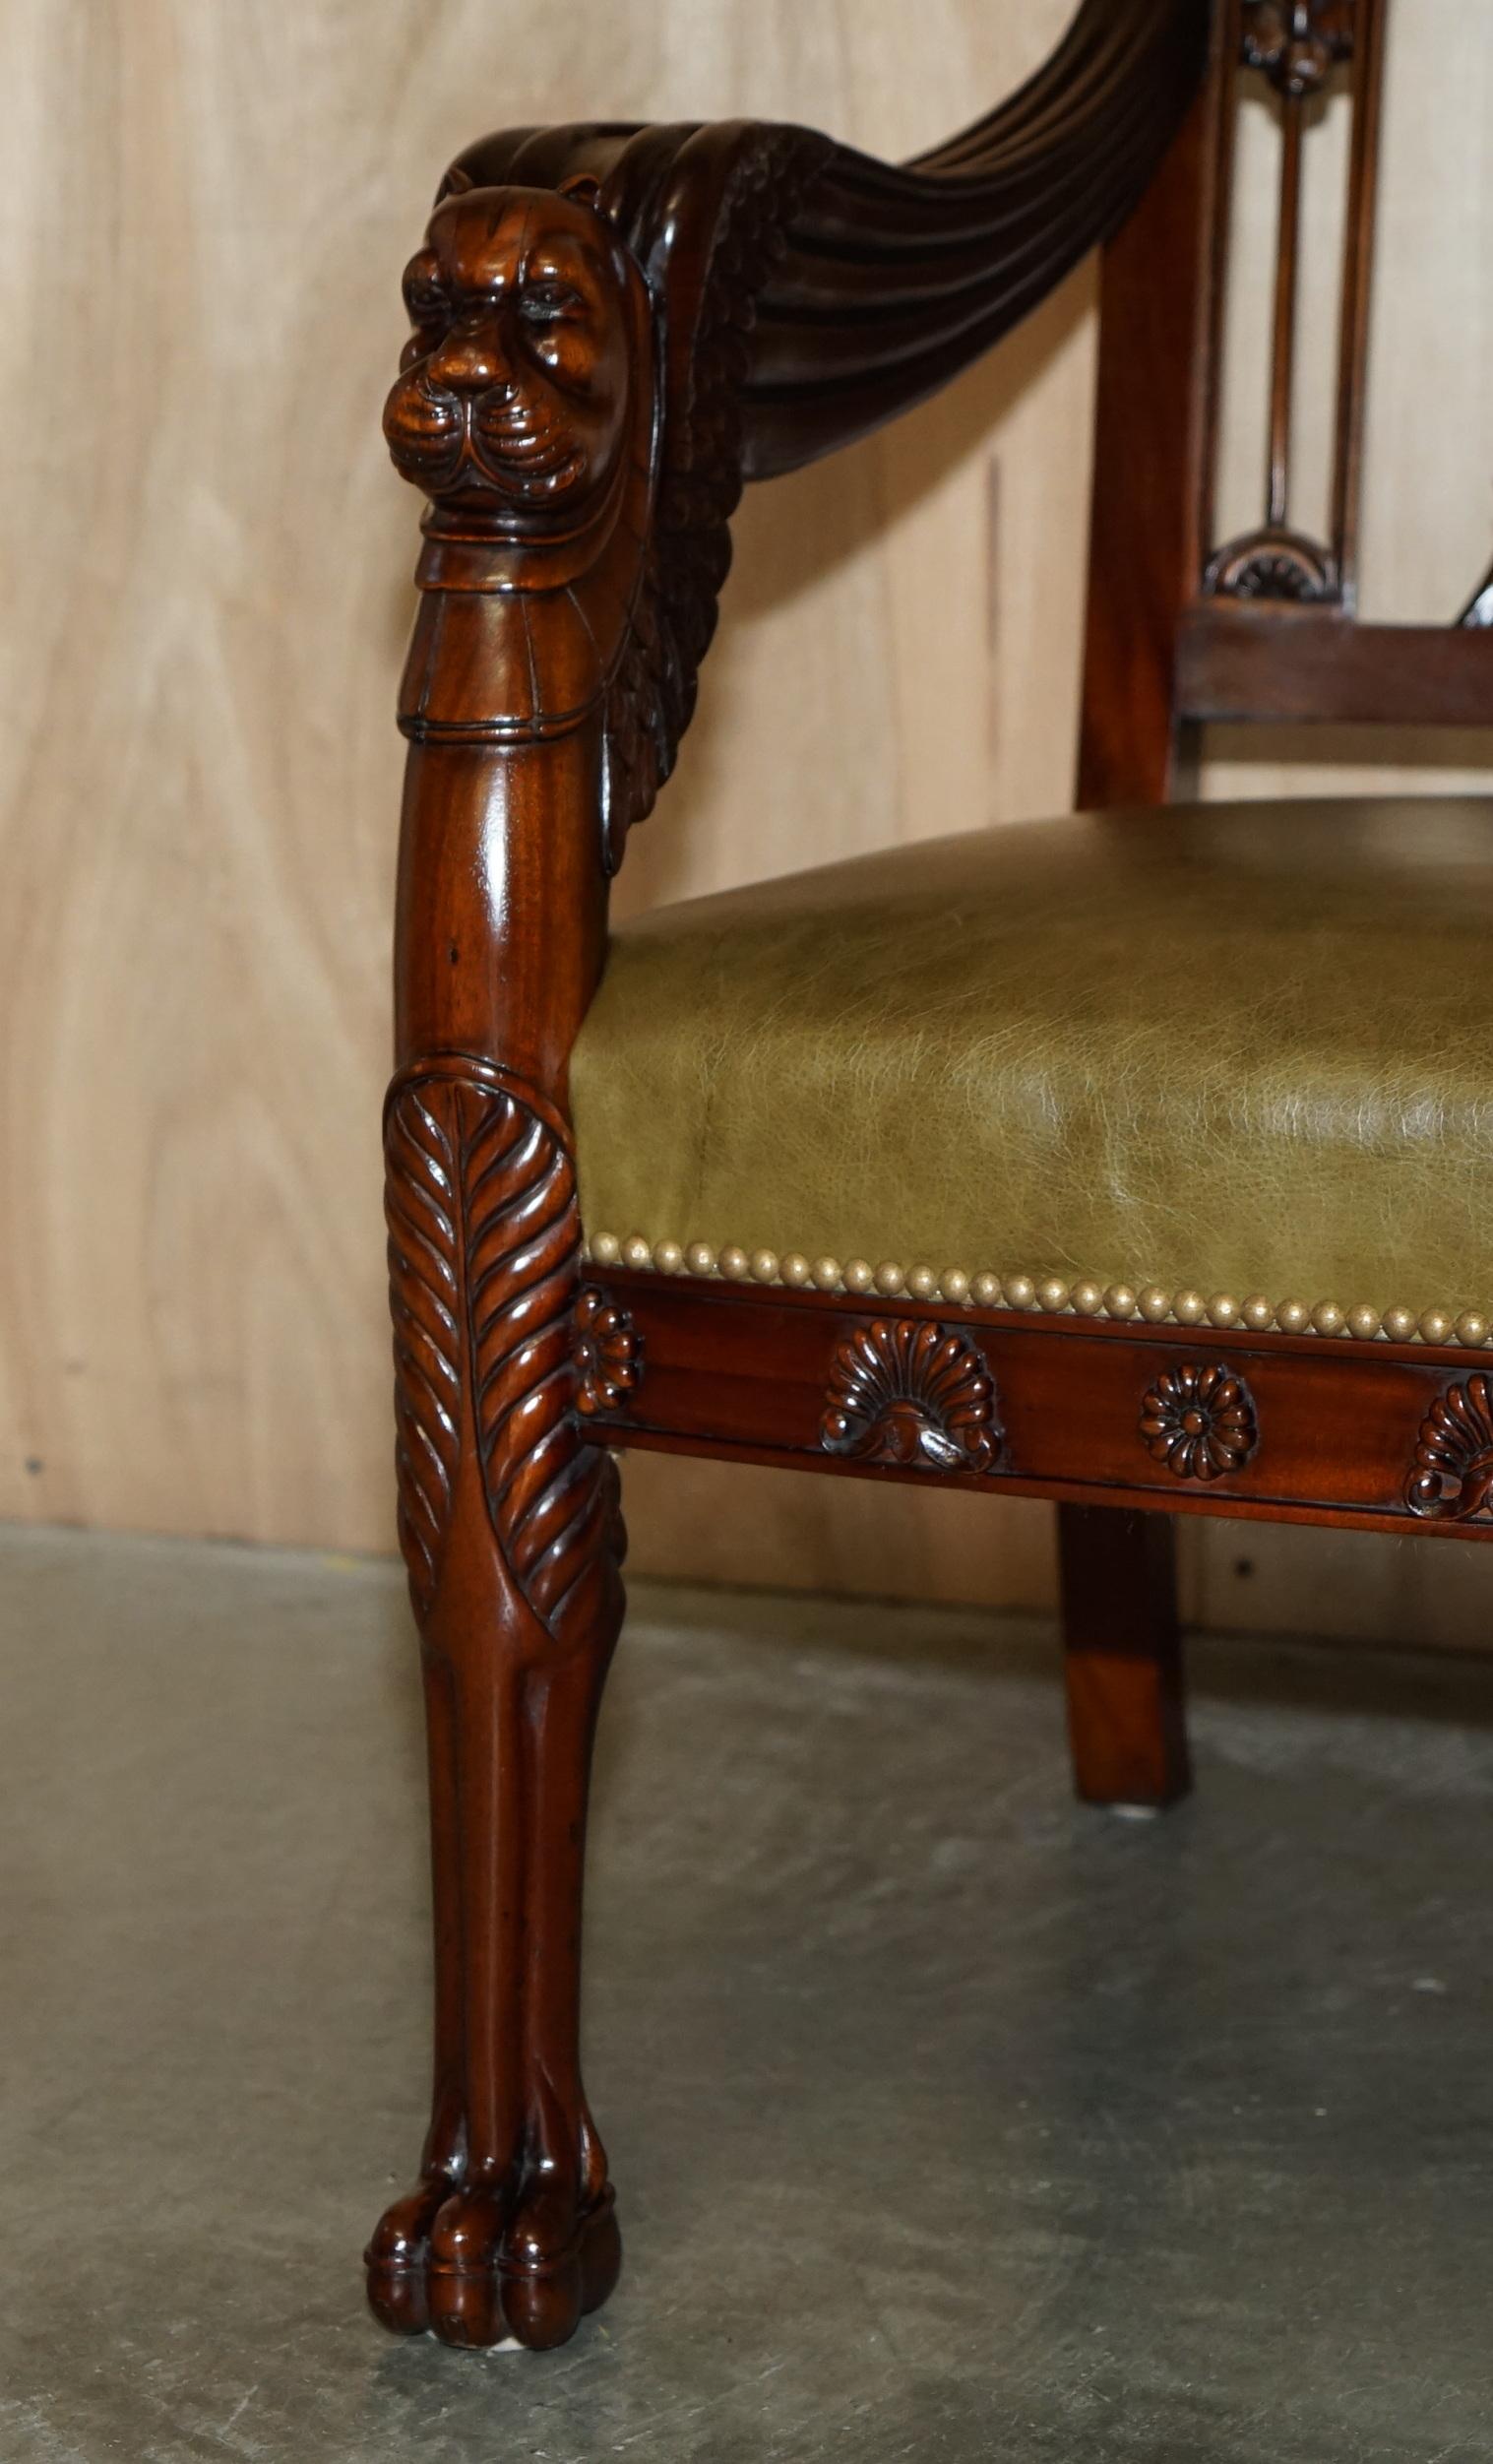 EXQUISITE PAIR OF HAND CARved HARDWOOD LiBRARY ARMCHAIRS LION GRIFFON WING ARMS im Angebot 1